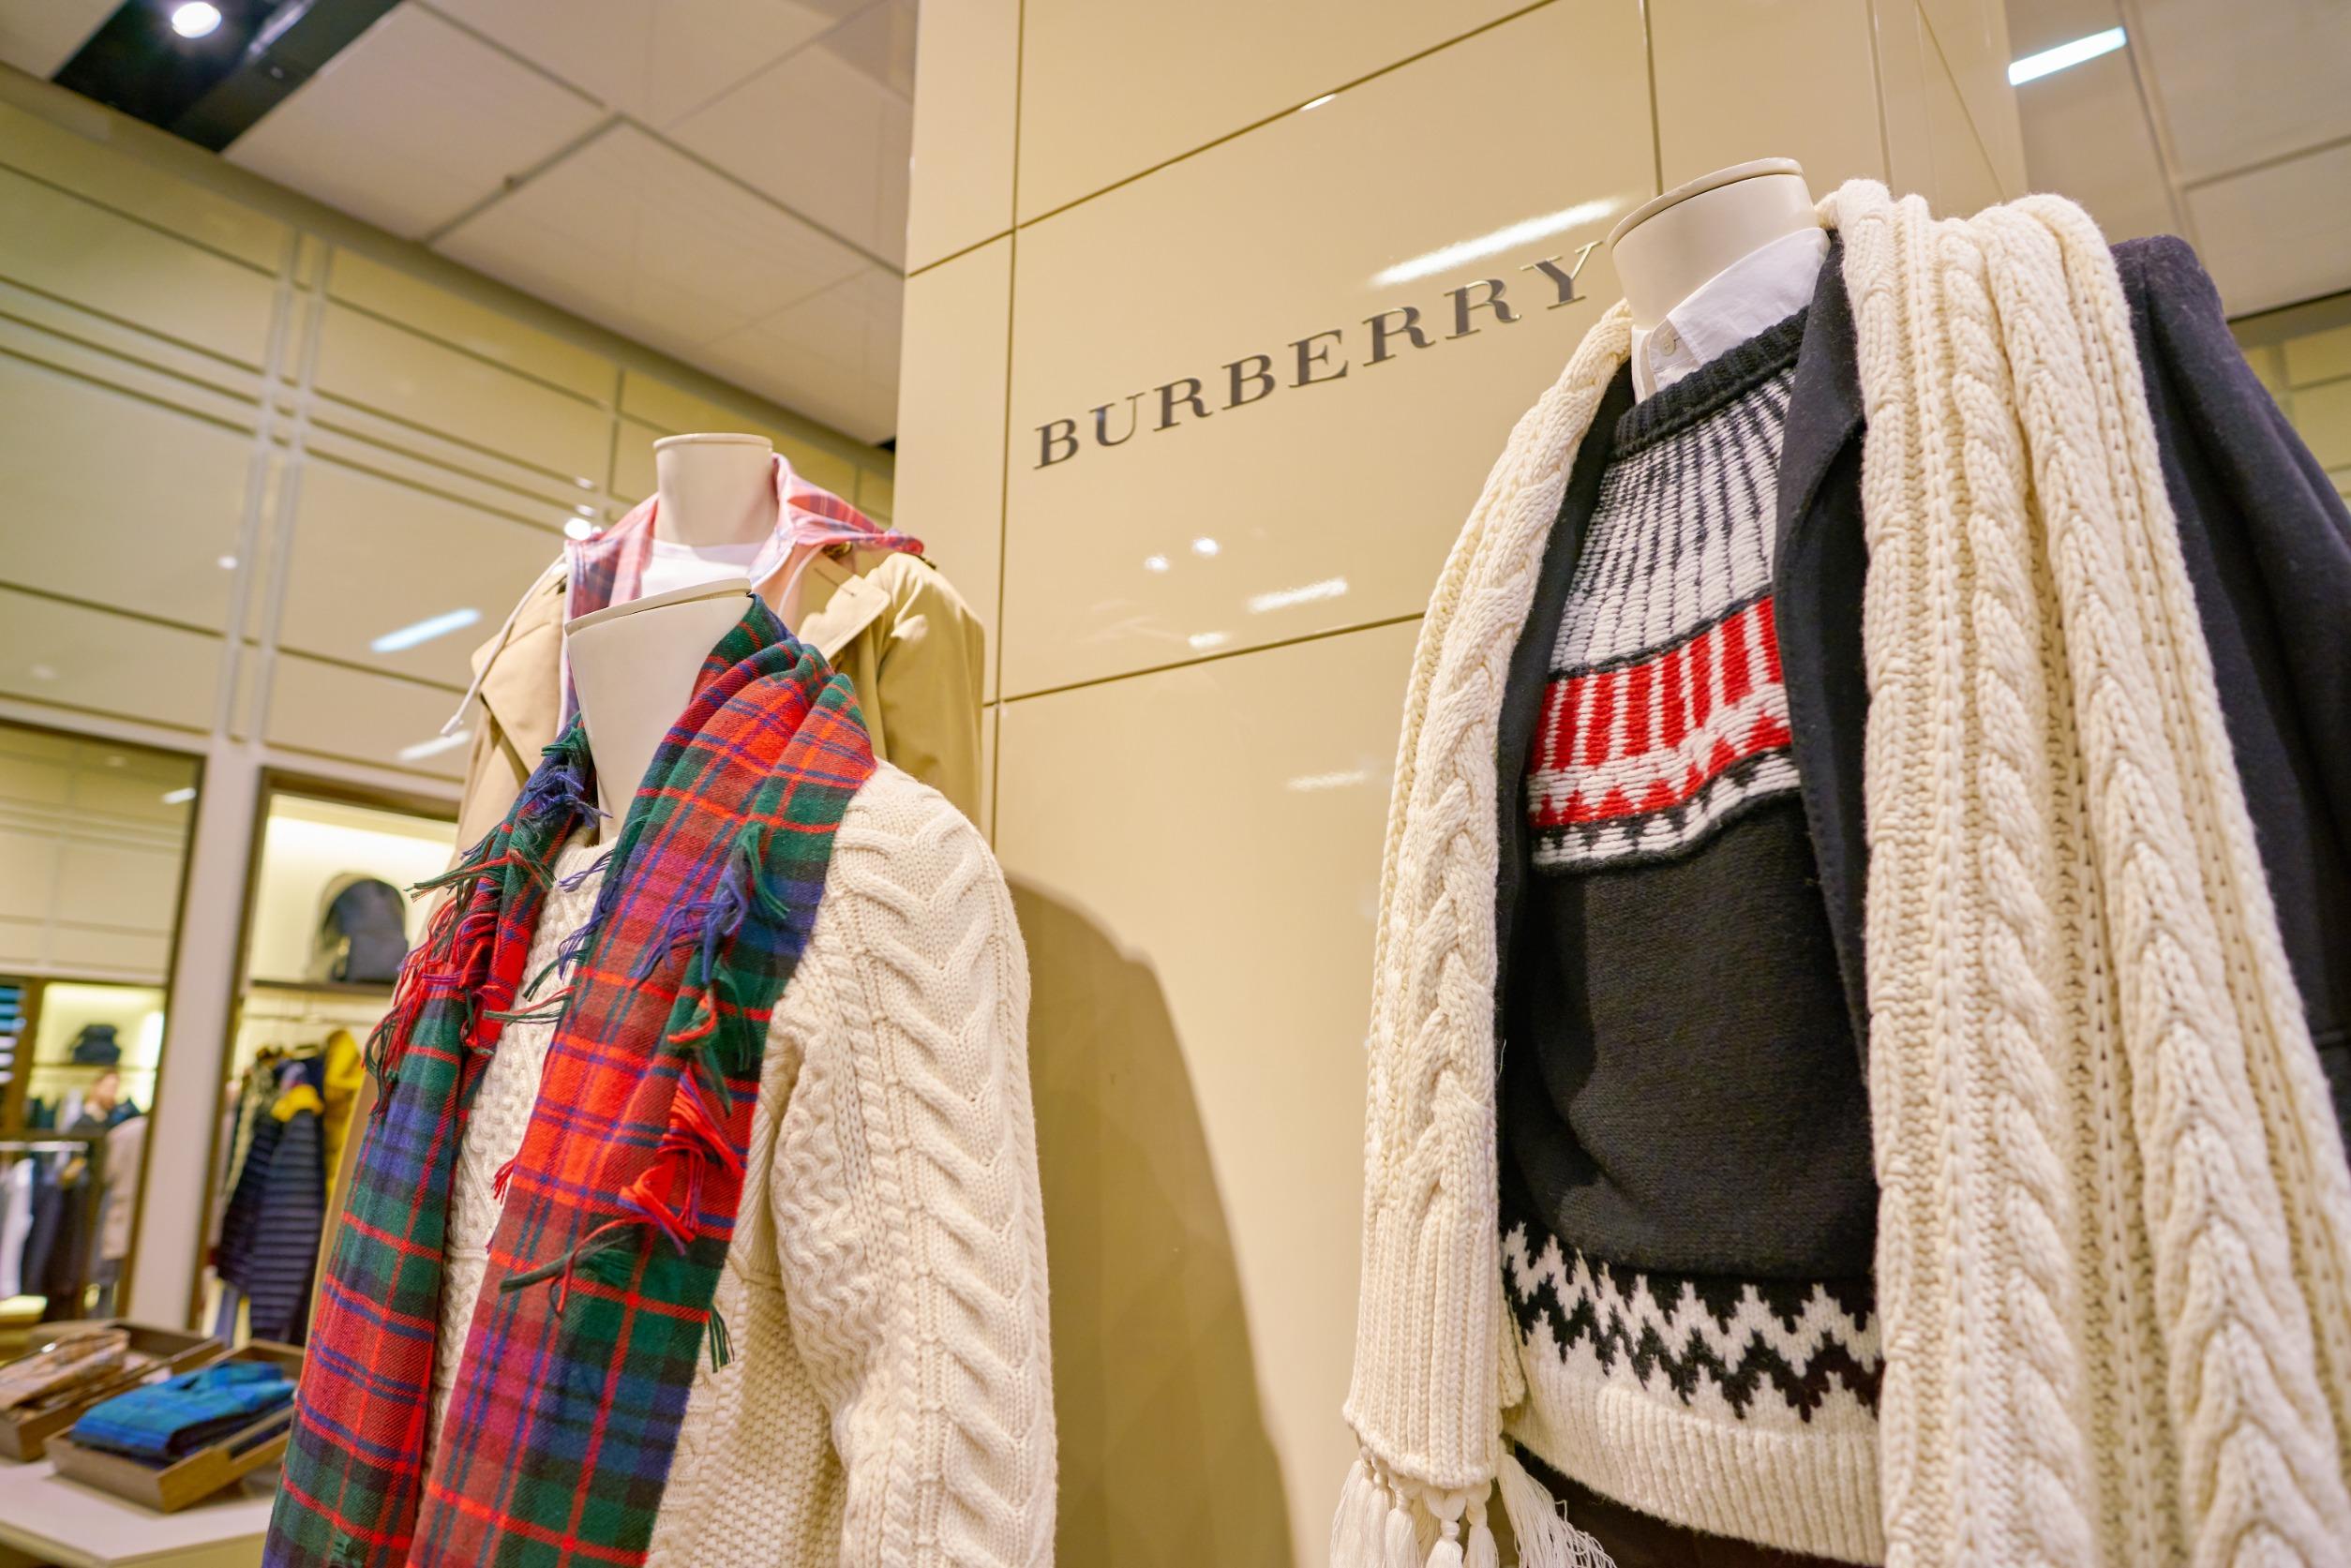 Burberry Share Price: Sales Tank as China’s Covid-19 Restrictions Trounce Demand